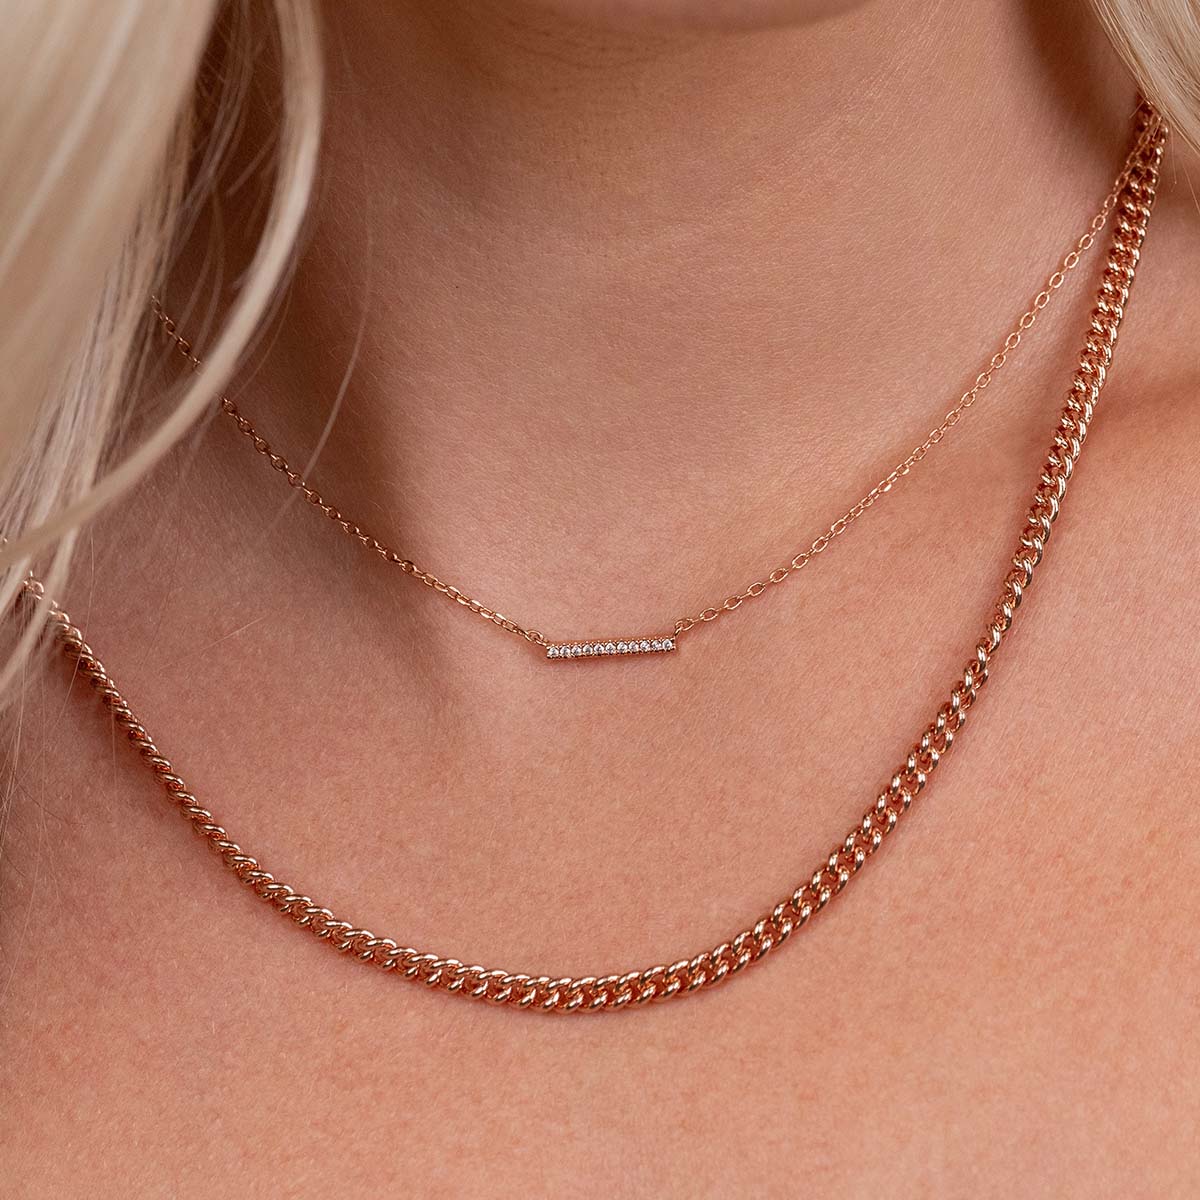 Layered rose gold chain necklaces